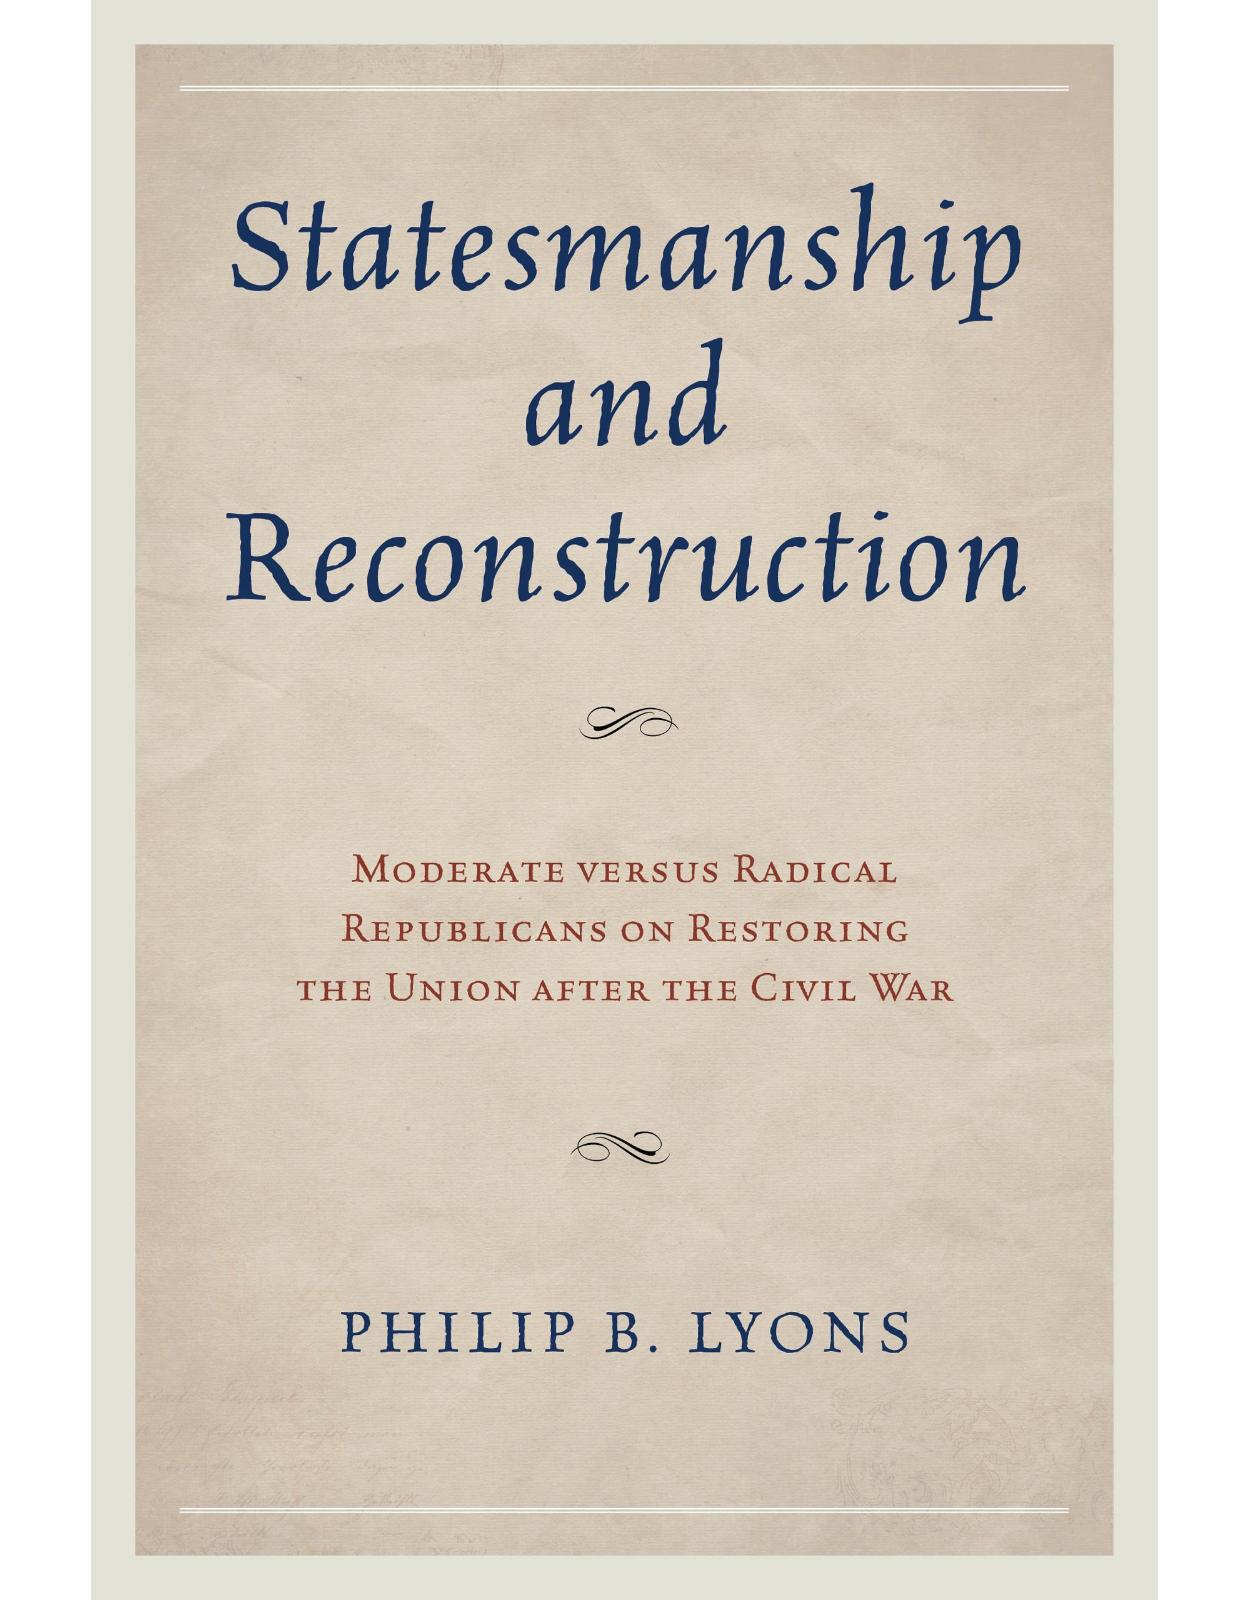 Statesmanship and Reconstruction: Moderate versus Radical Republicans on Restoring the Union after the Civil War